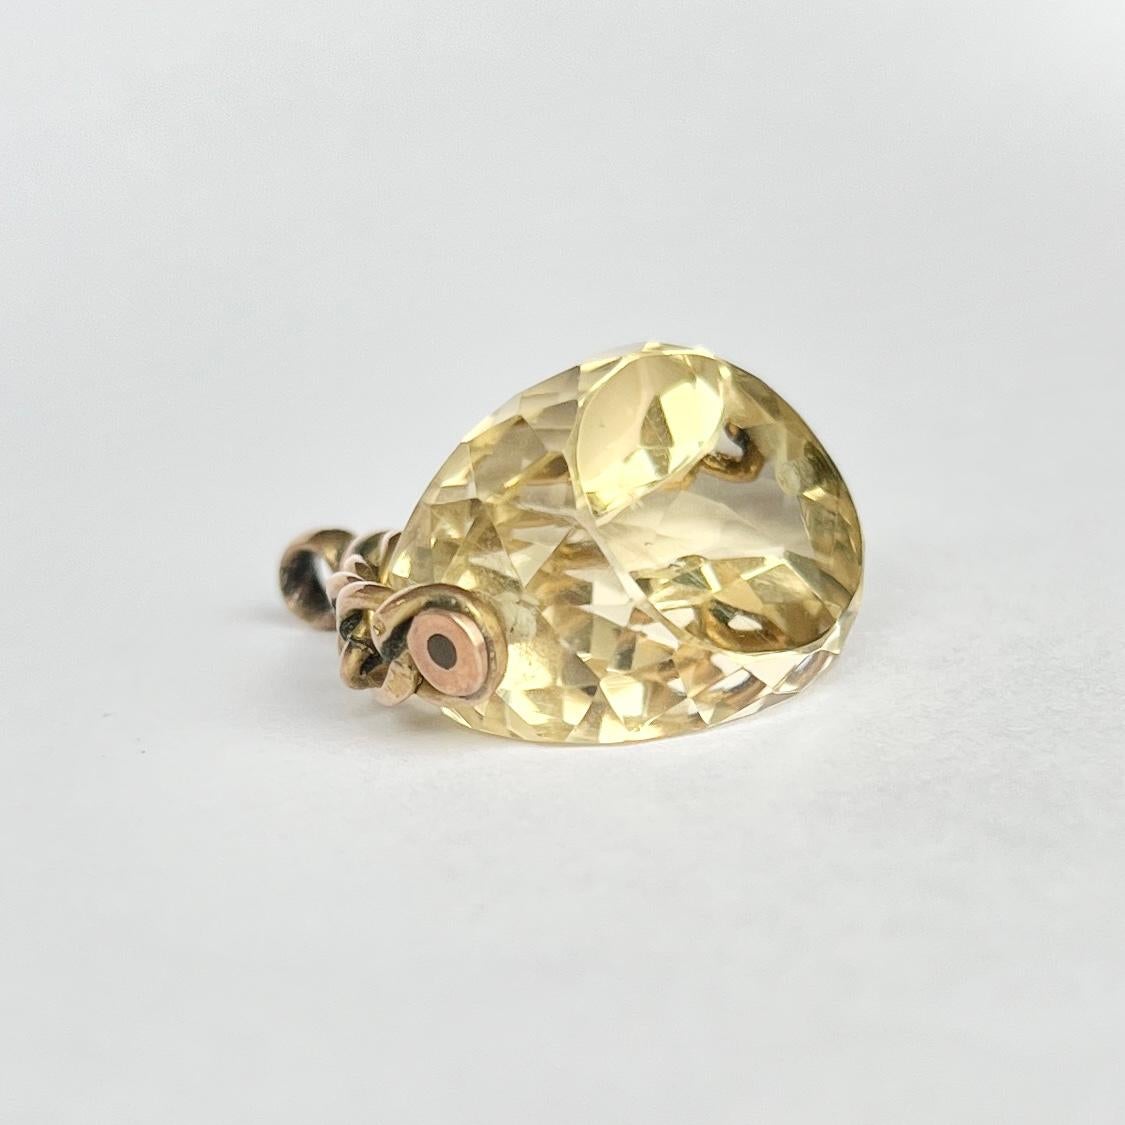 Uncut Antique Citrine and 9 Carat Gold Swivel Fob For Sale